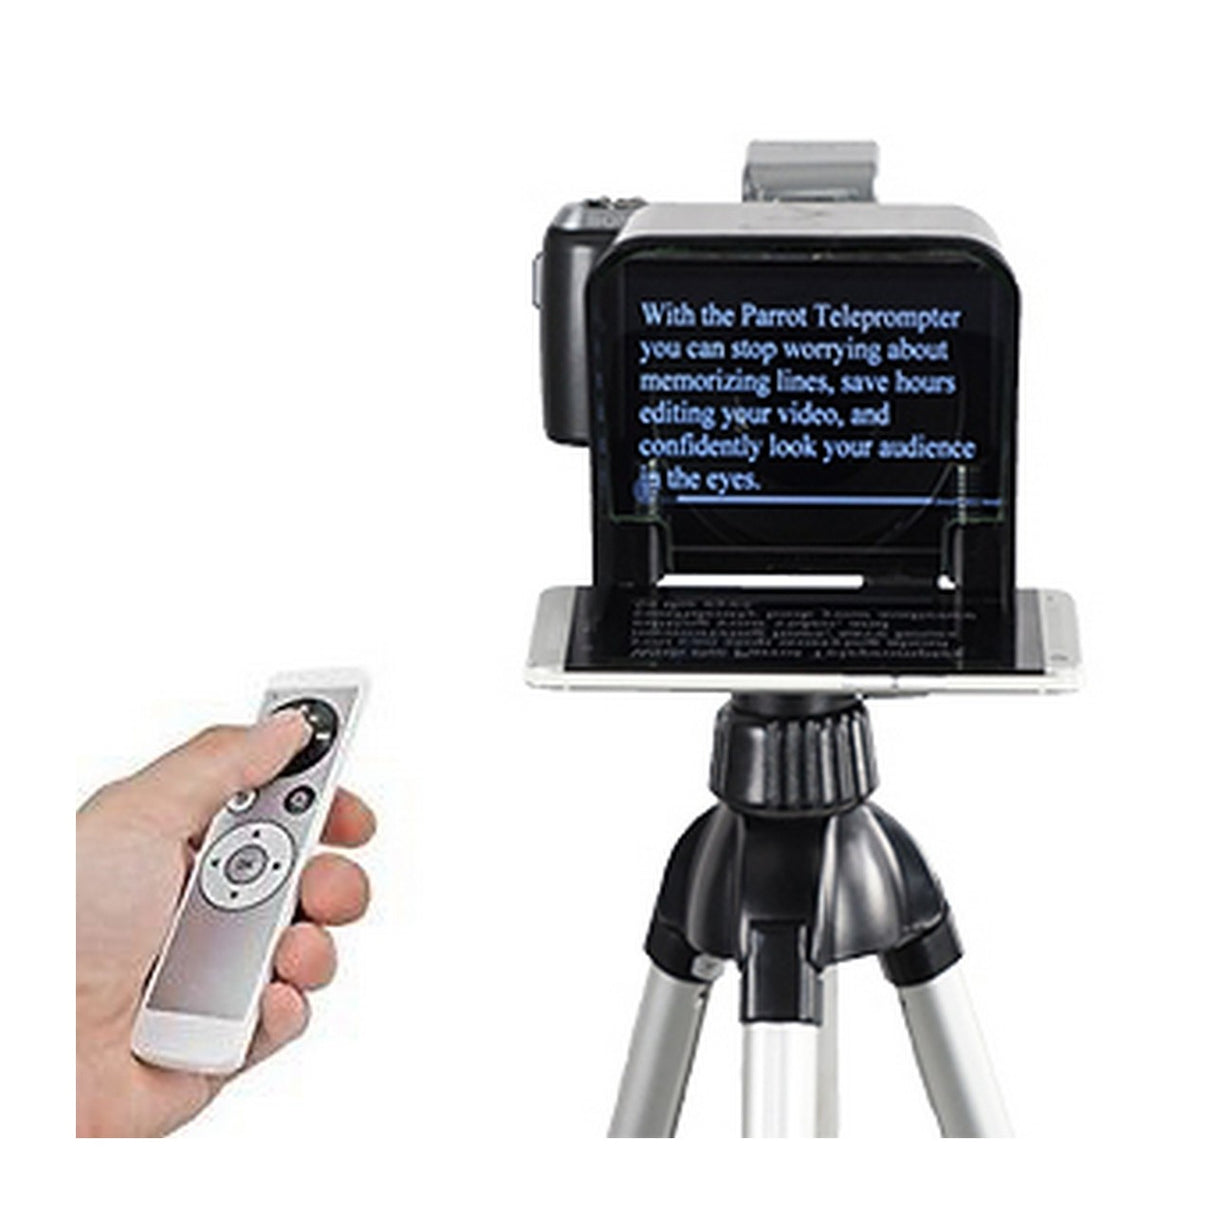 Parrot Teleprompter Remote | Wireless Bluetooth Remote for Teleprompter